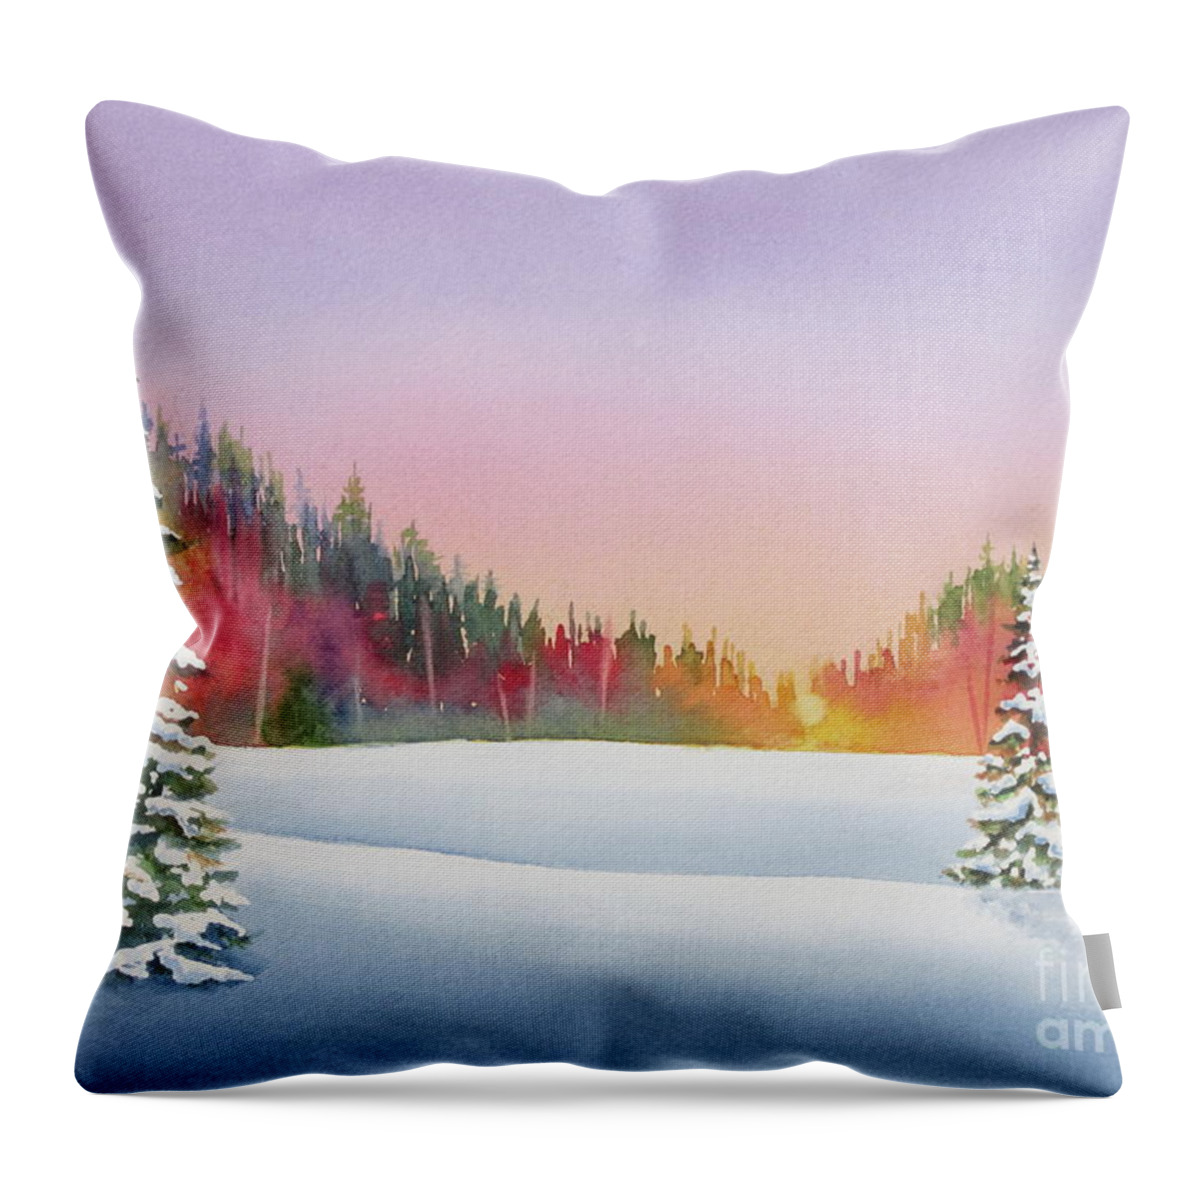 Landscape Throw Pillow featuring the painting Sunset In the Pines by Deborah Ronglien